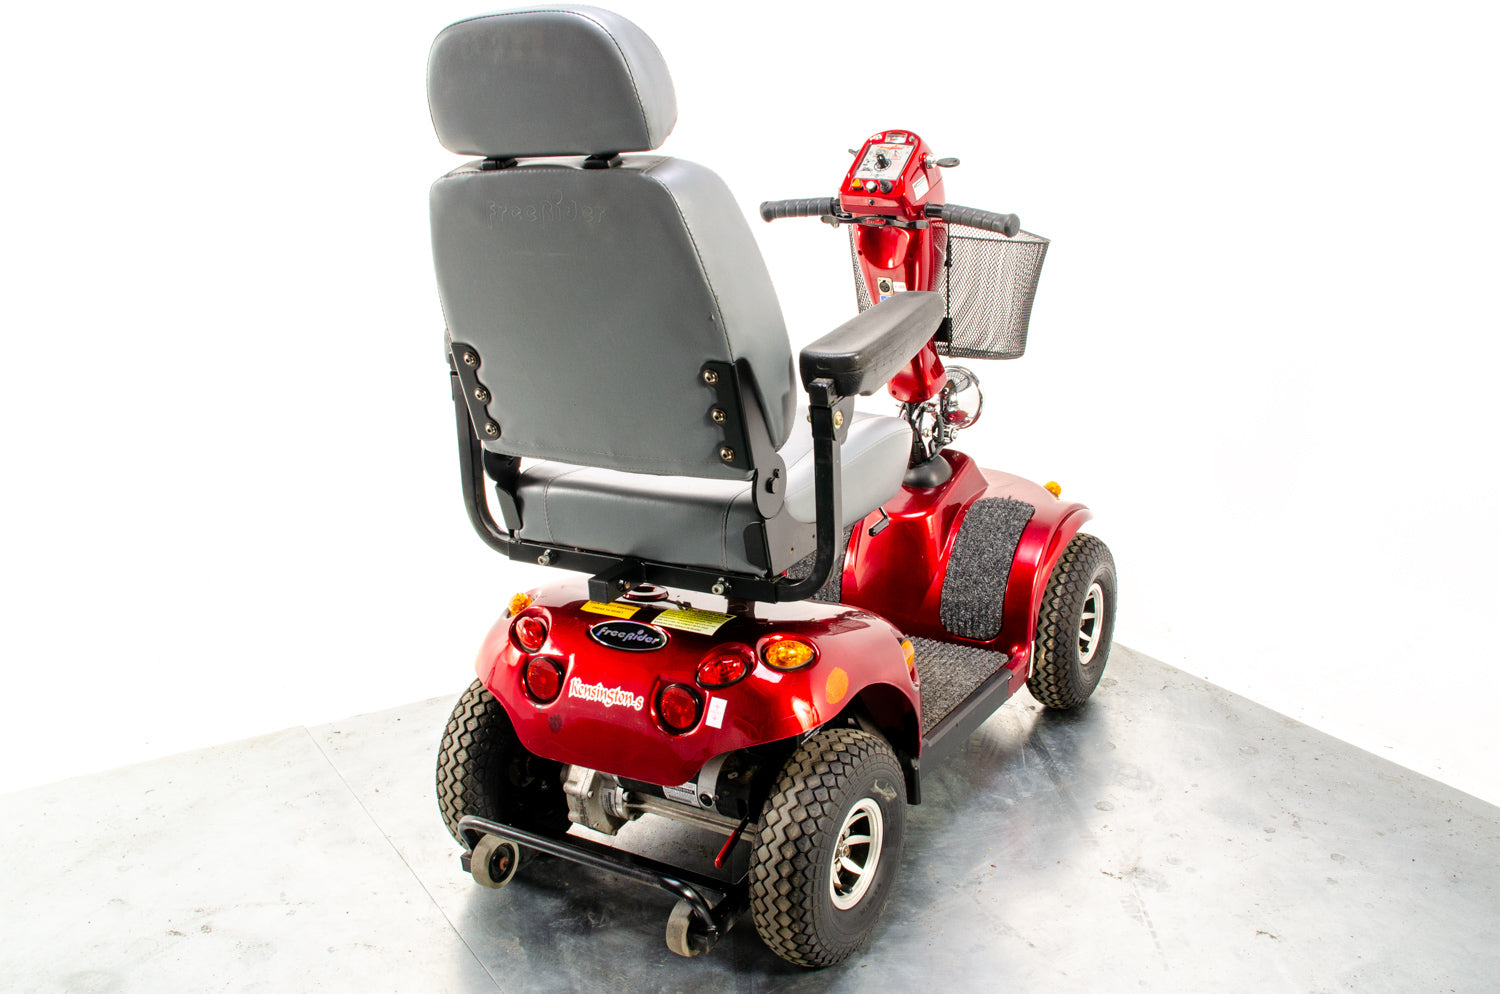 Freerider Kensington S Used Mobility Scooter Midsize All-Terrain Pavement Road Legal Red